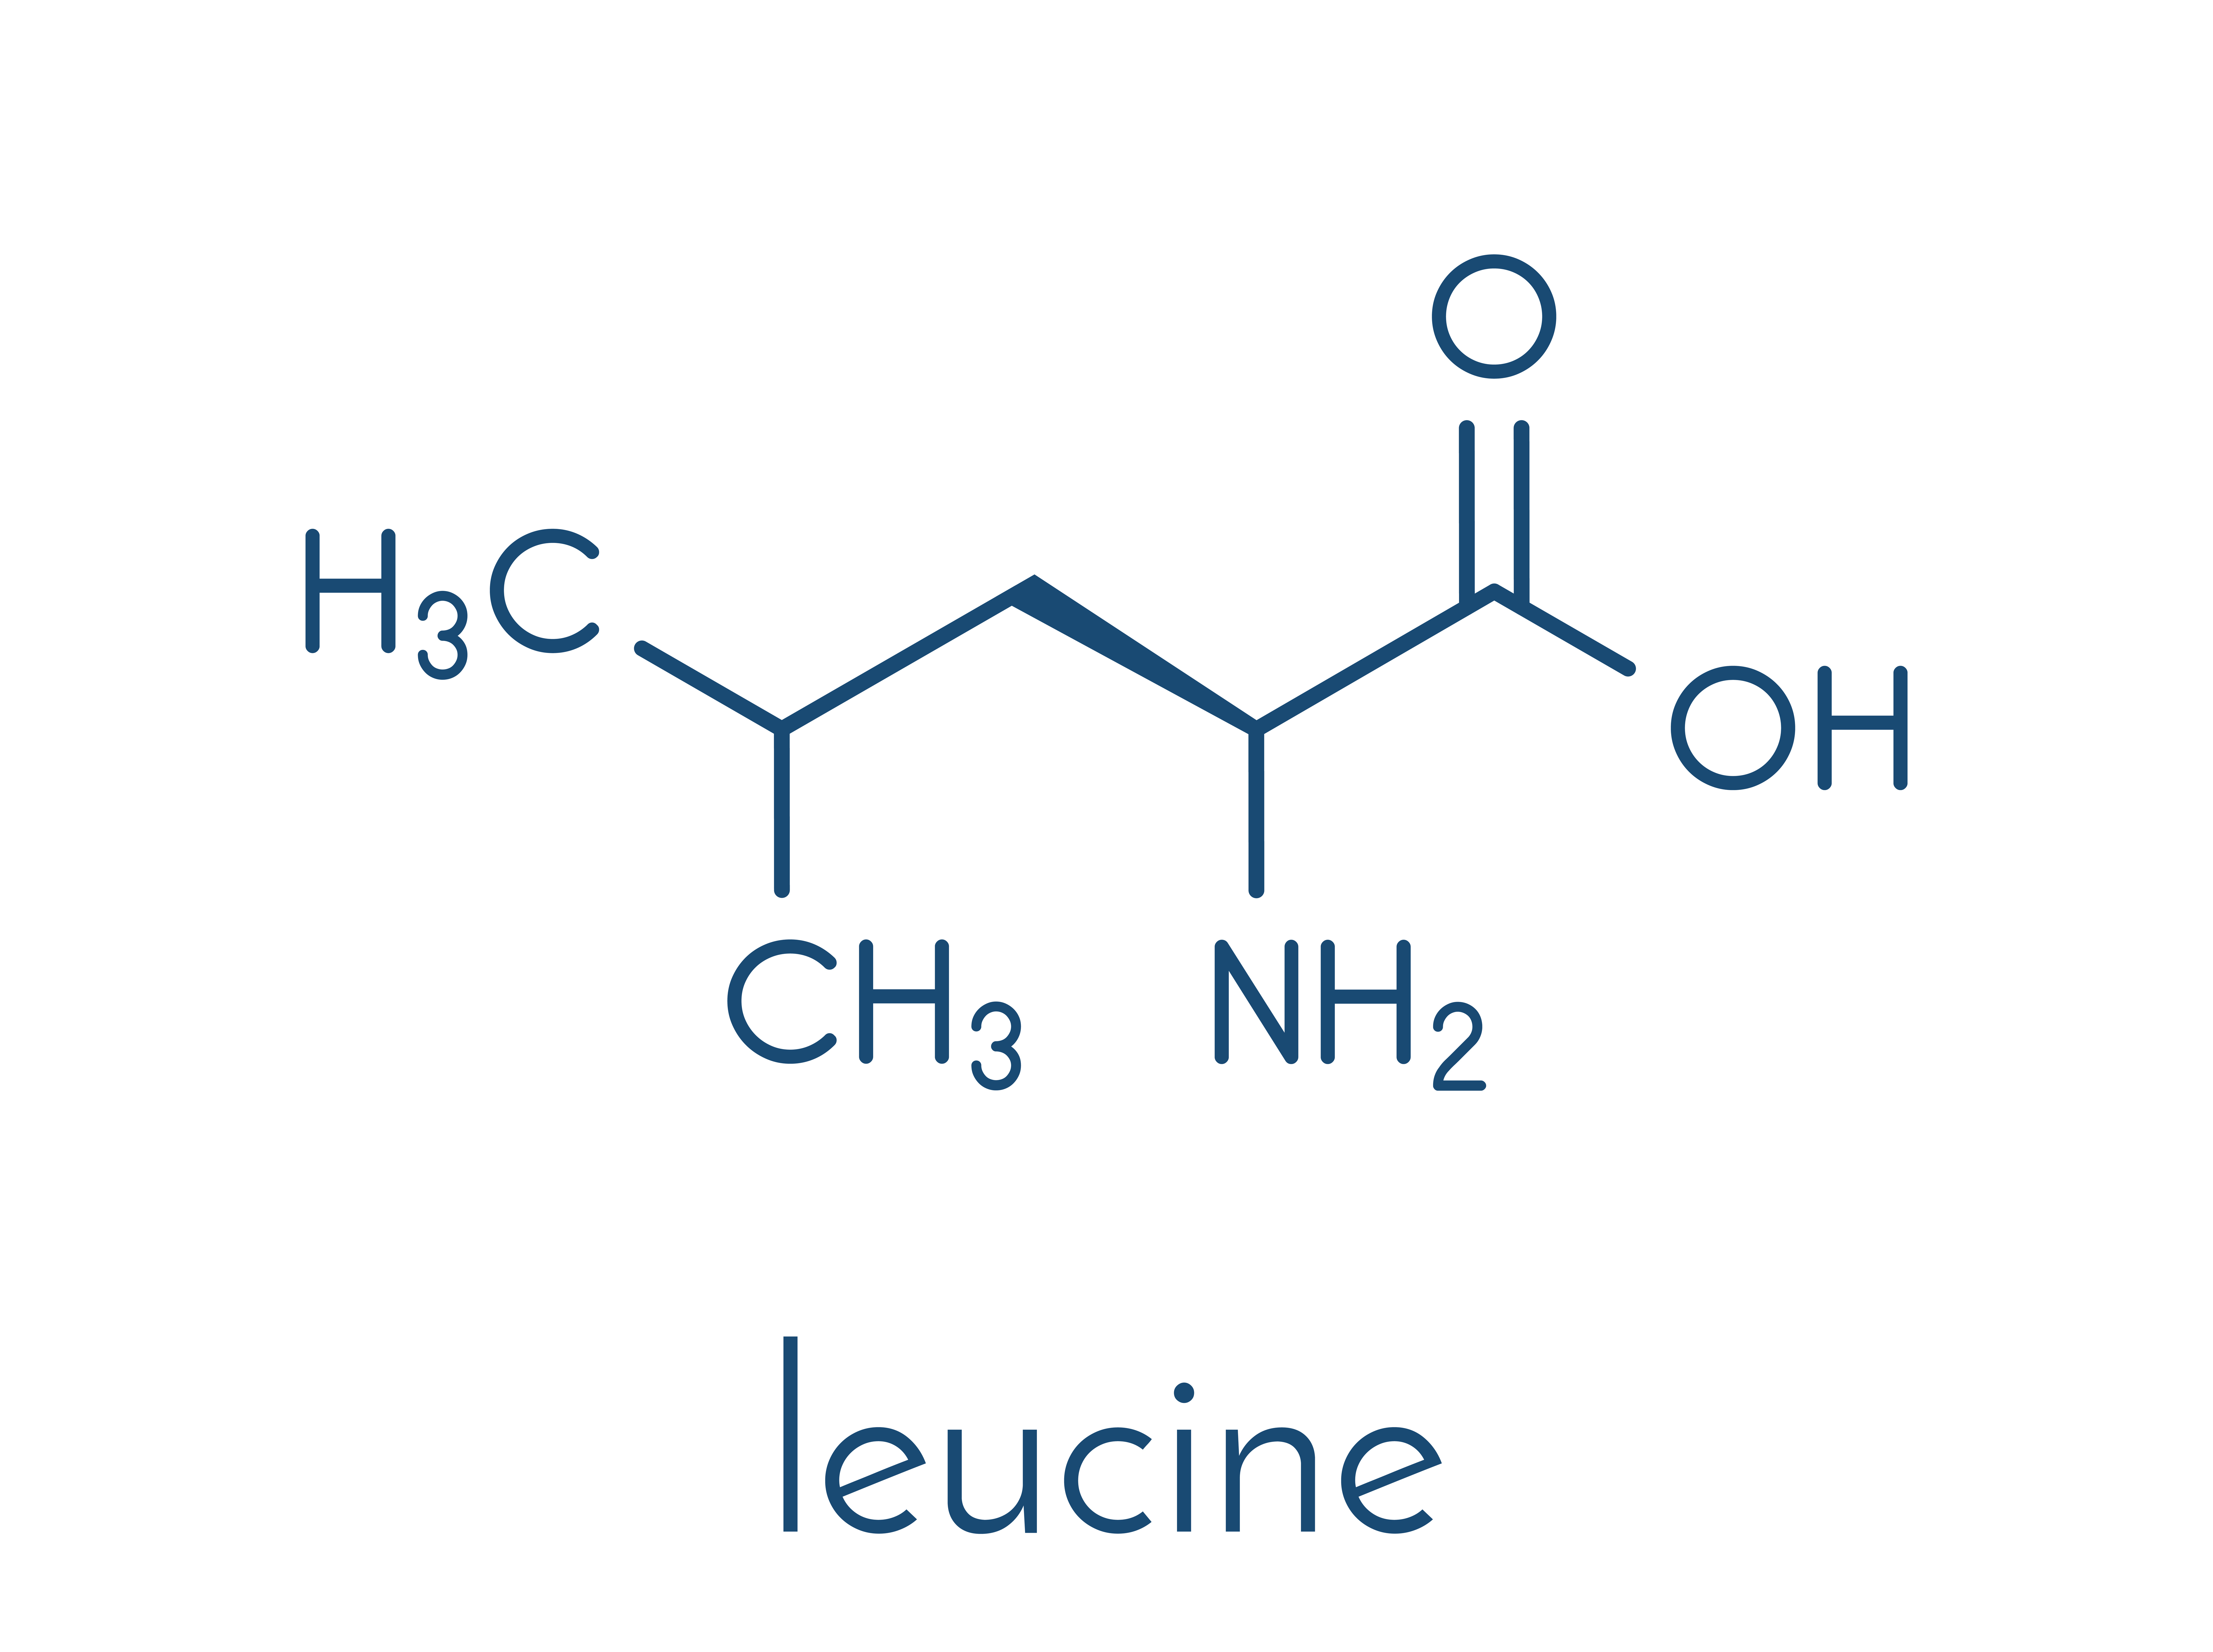 Leucine - the most important egzogenous amino acid, which supplementation is crucial if you want to build muscle mass